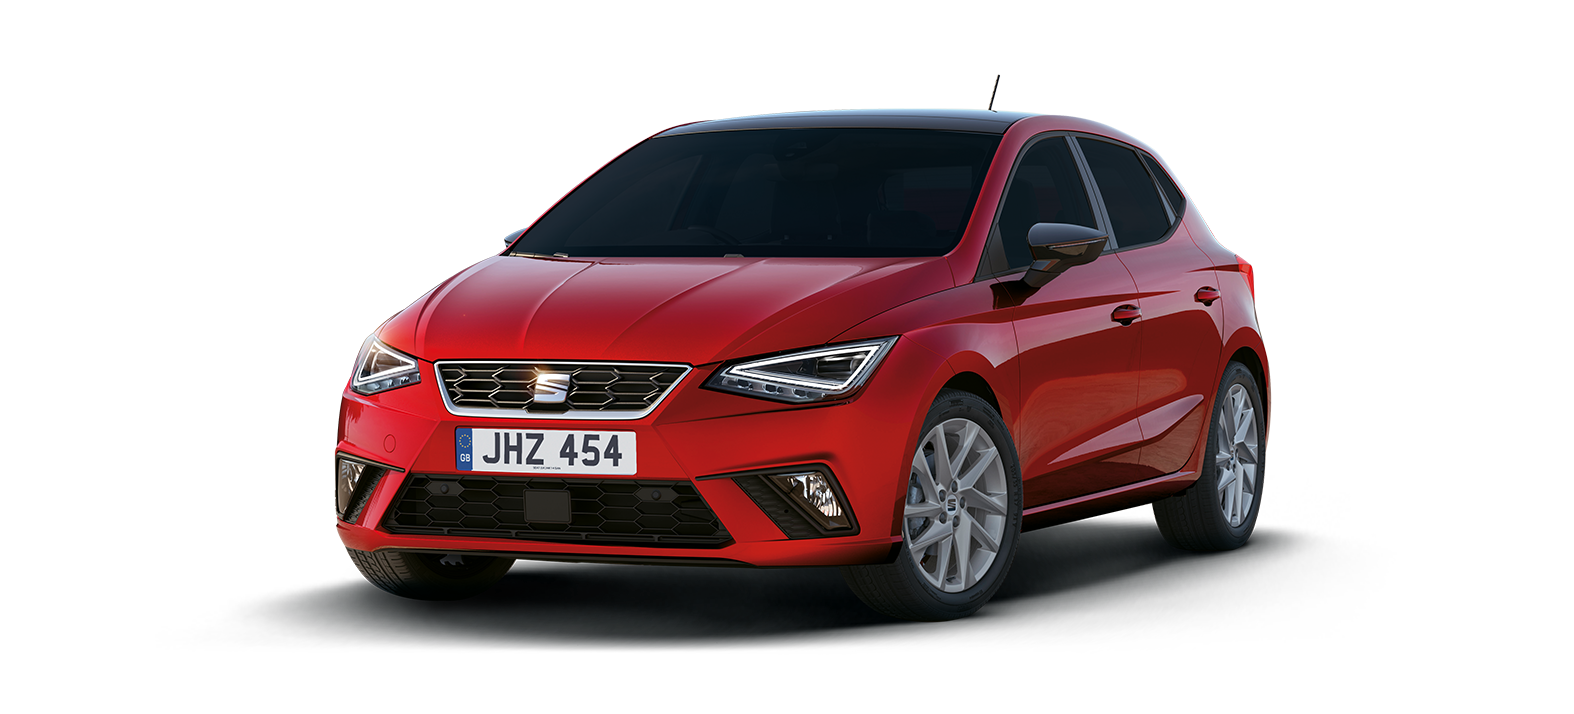 terras toilet Notebook SEAT Ibiza FR | SEAT Ibiza Dimensions and Features | SEAT UK